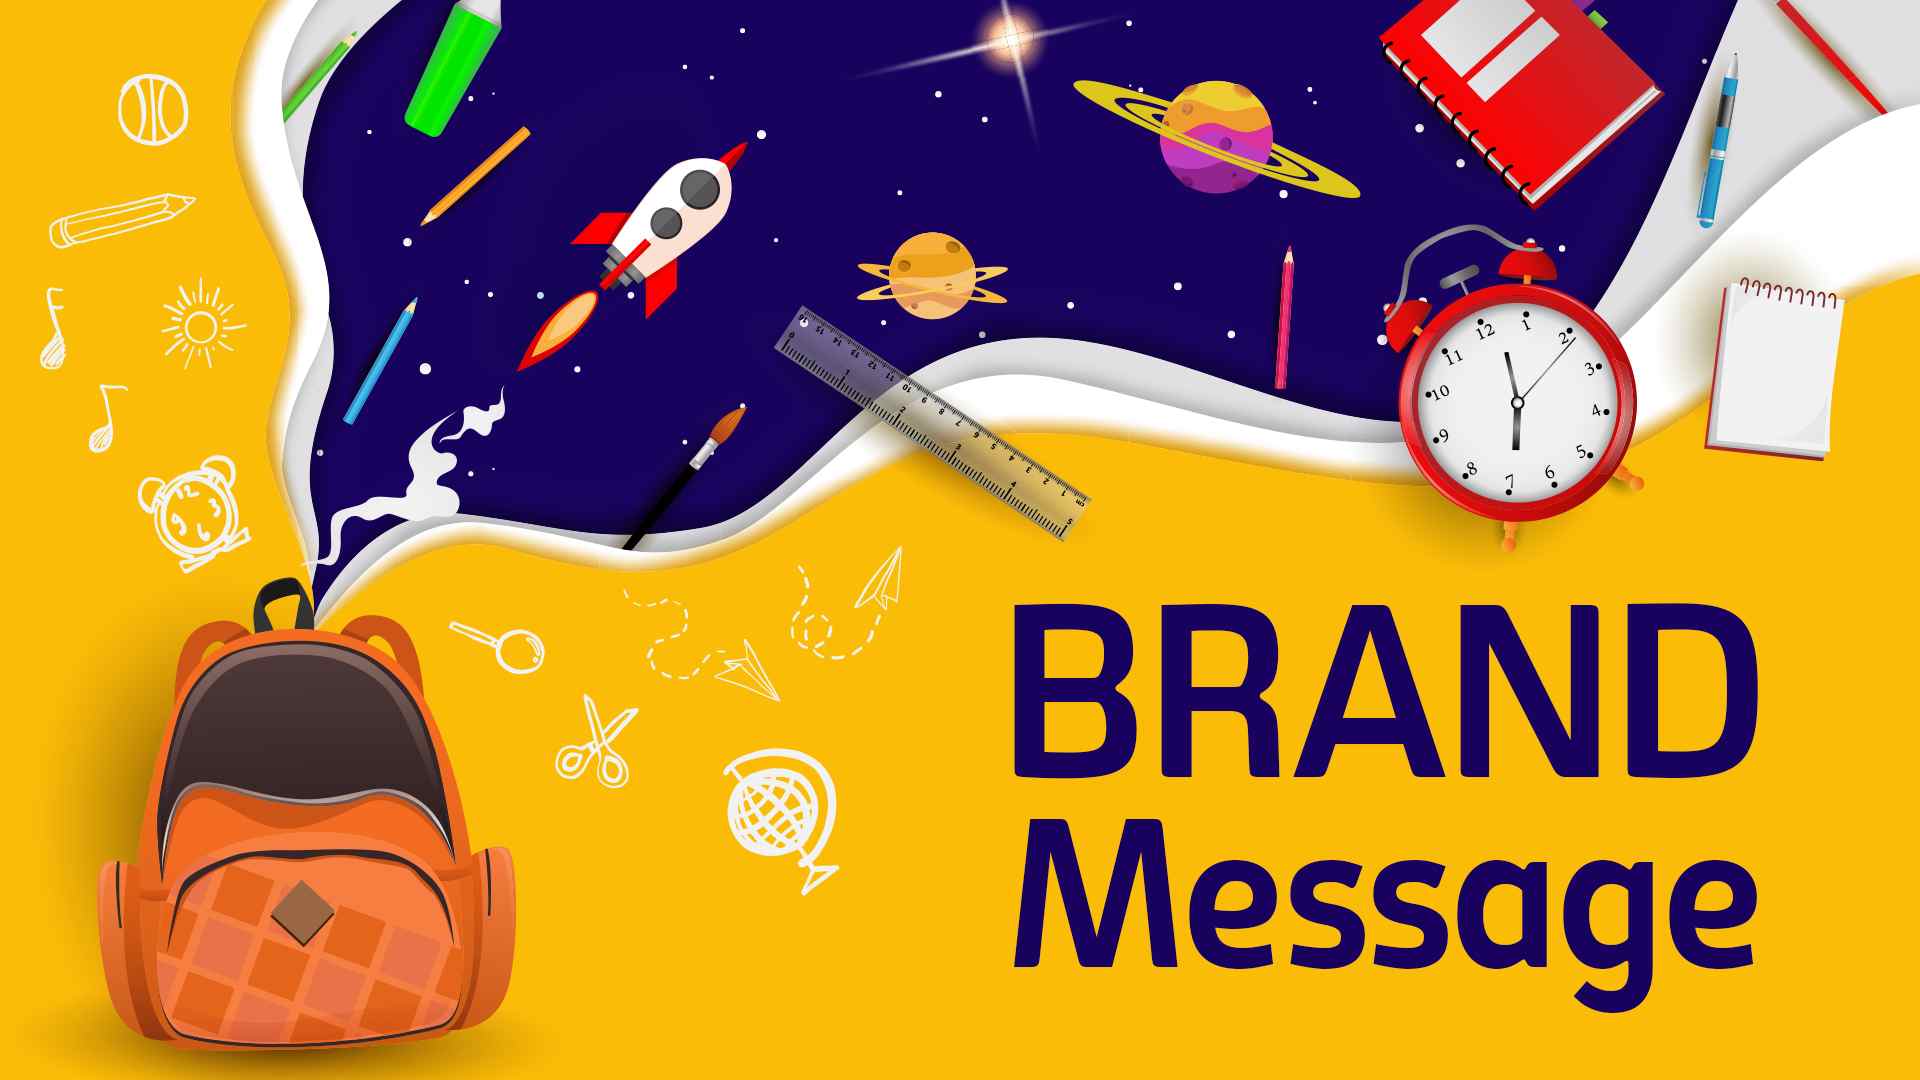 Brand message | How to create a brand message | Article by Darvideo